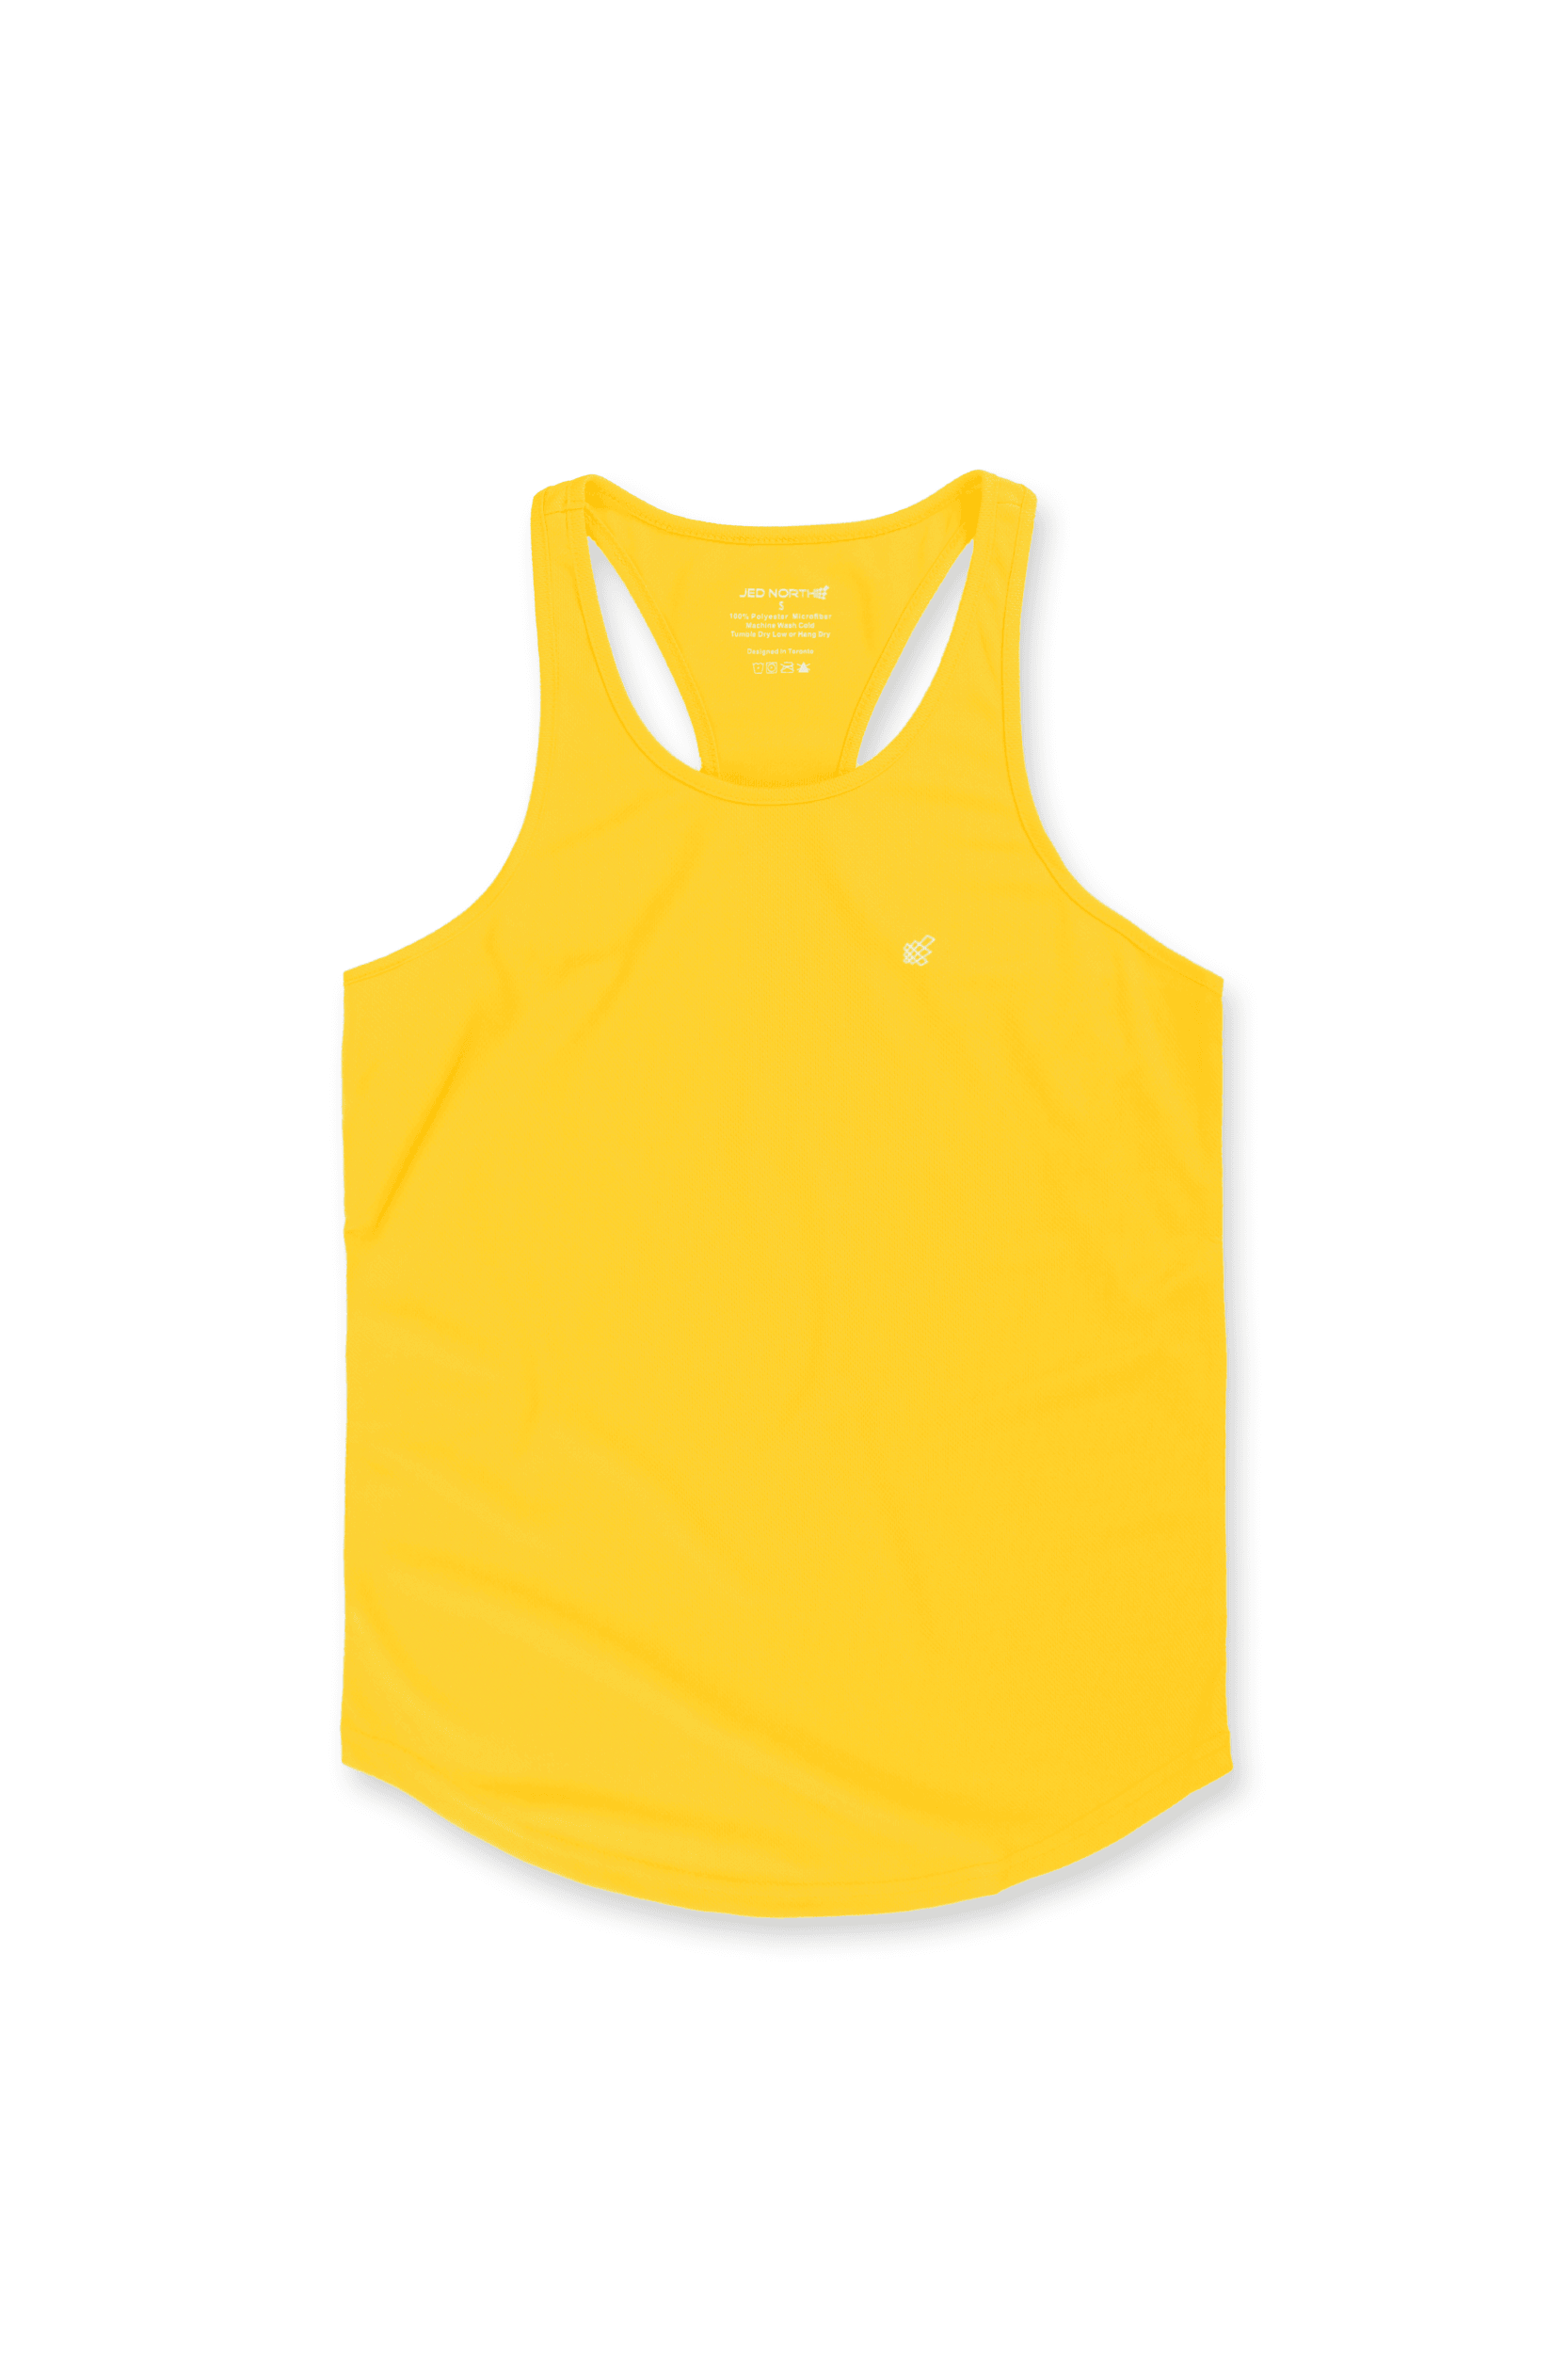 Dri-Fit Workout Bodybuilding Stringer - Yellow - Jed North